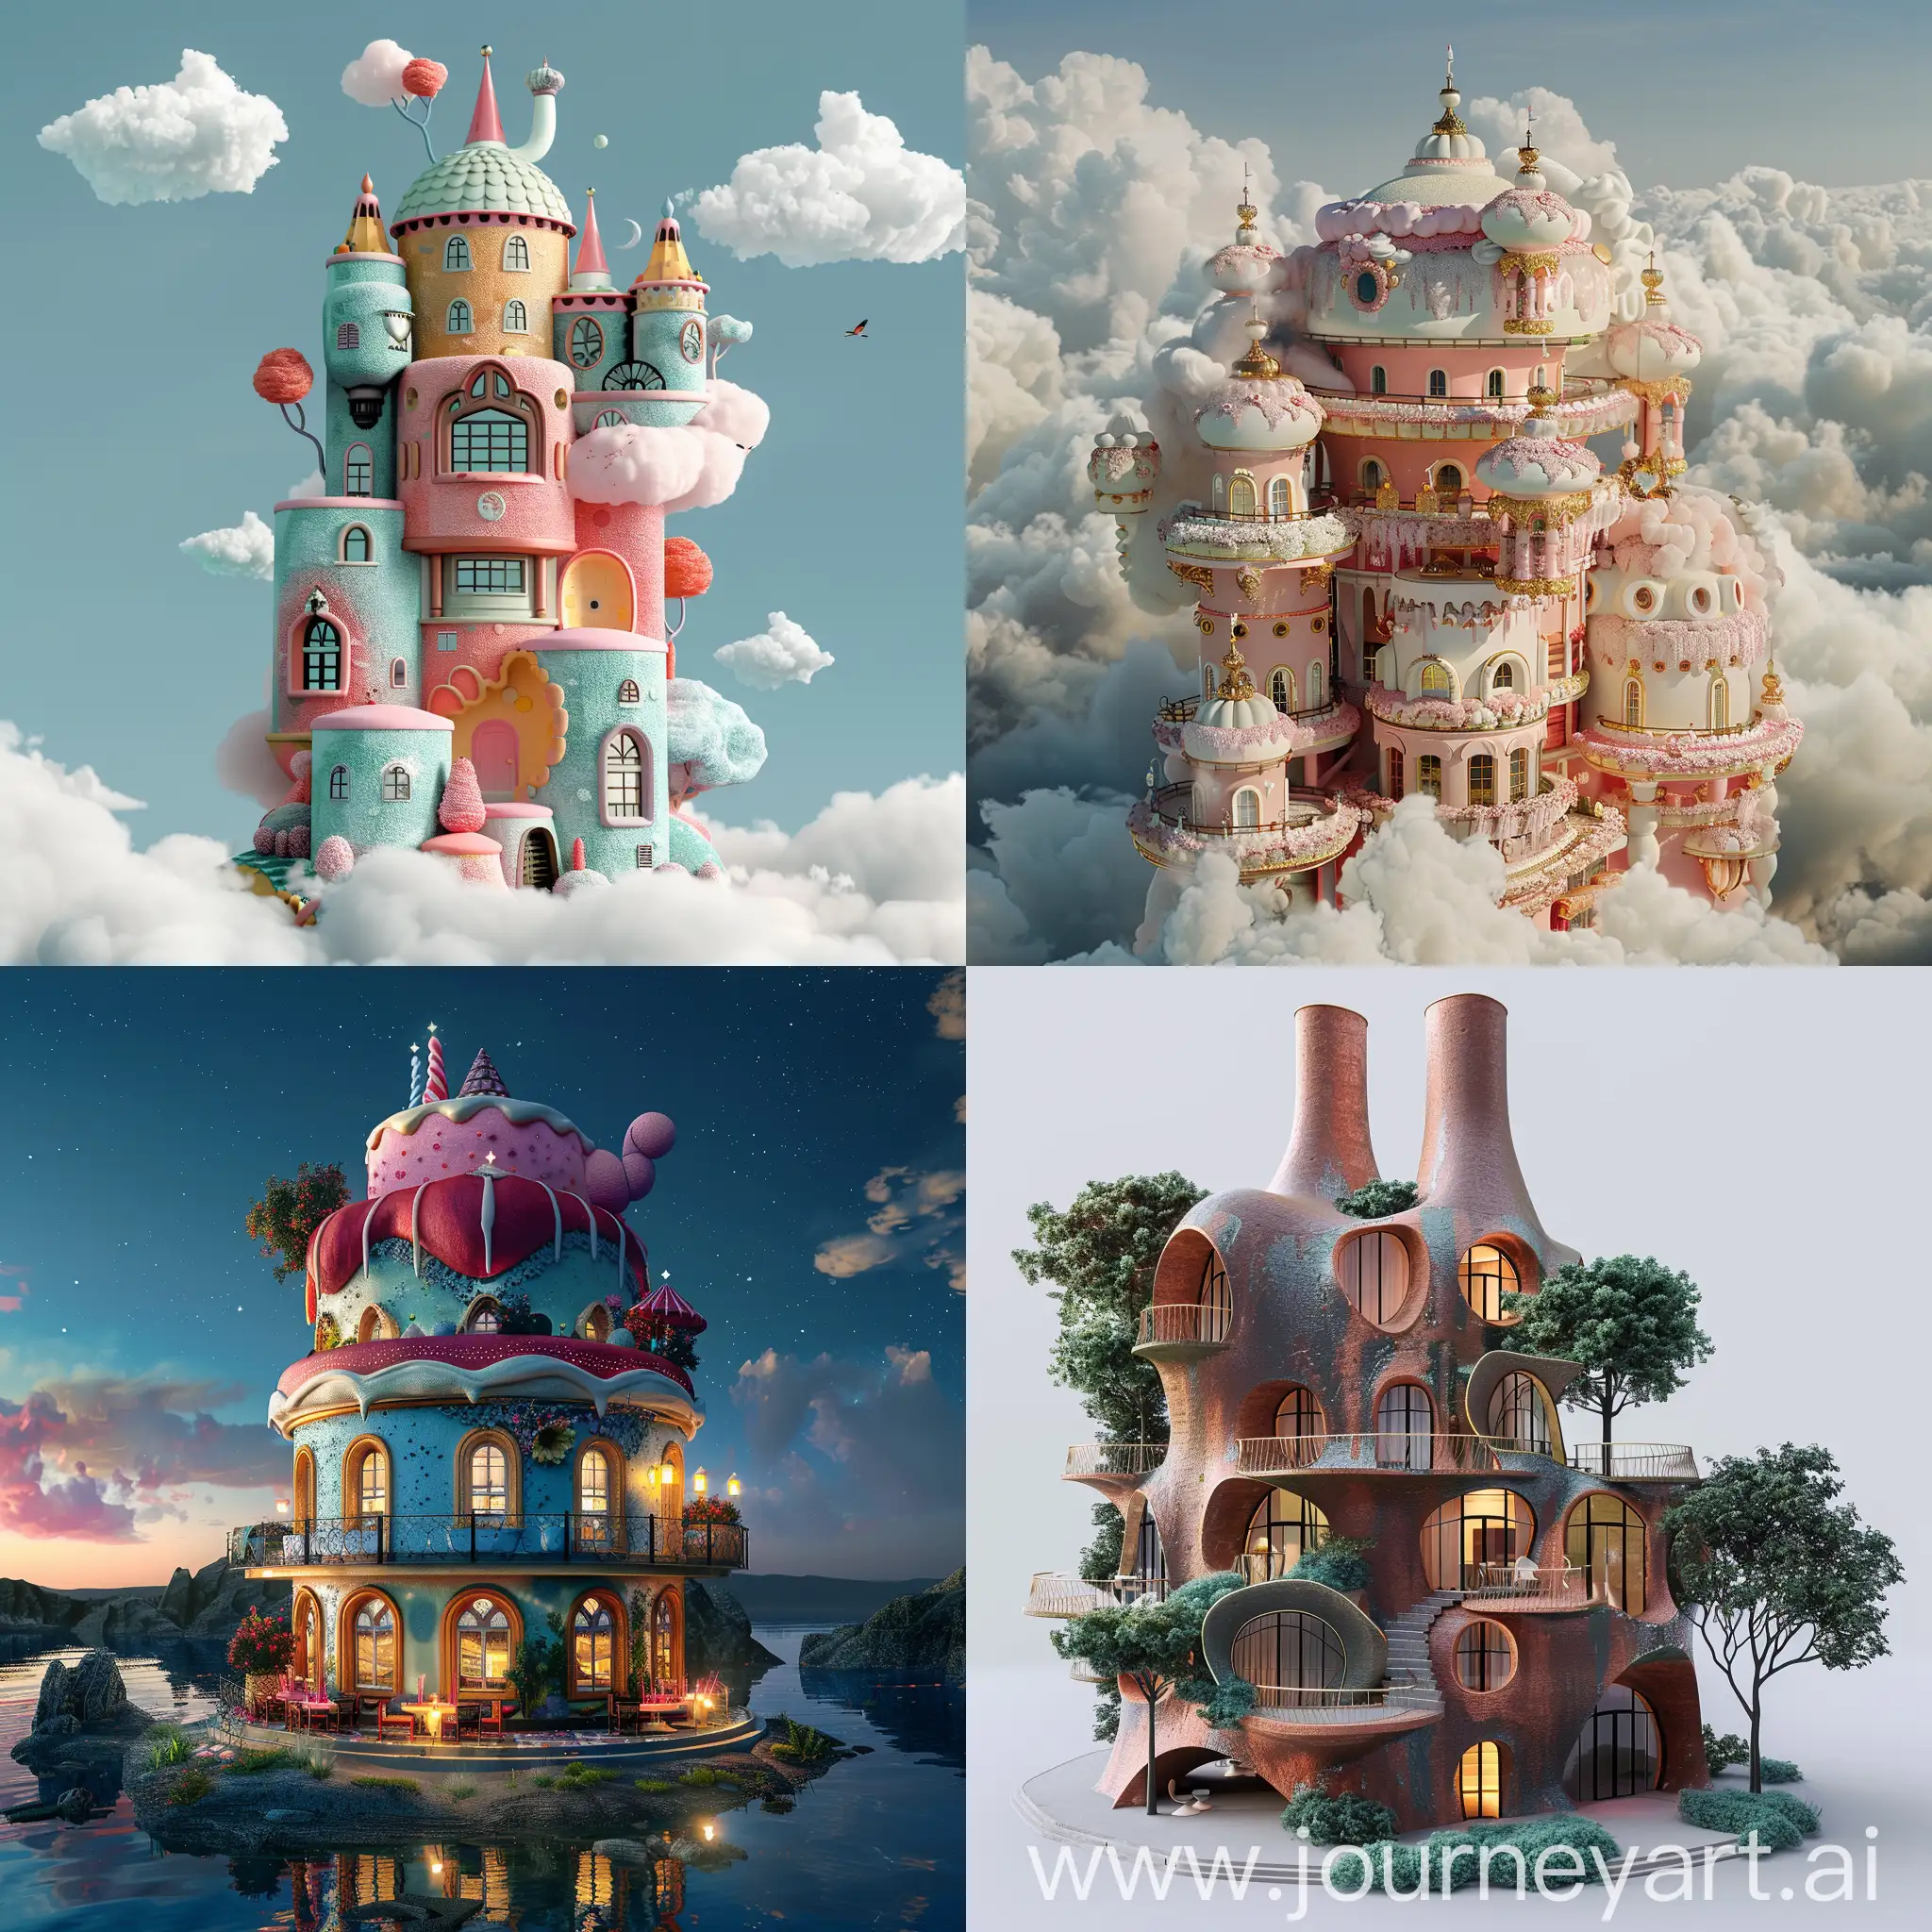 CakeShaped-Building-in-3D-Animation